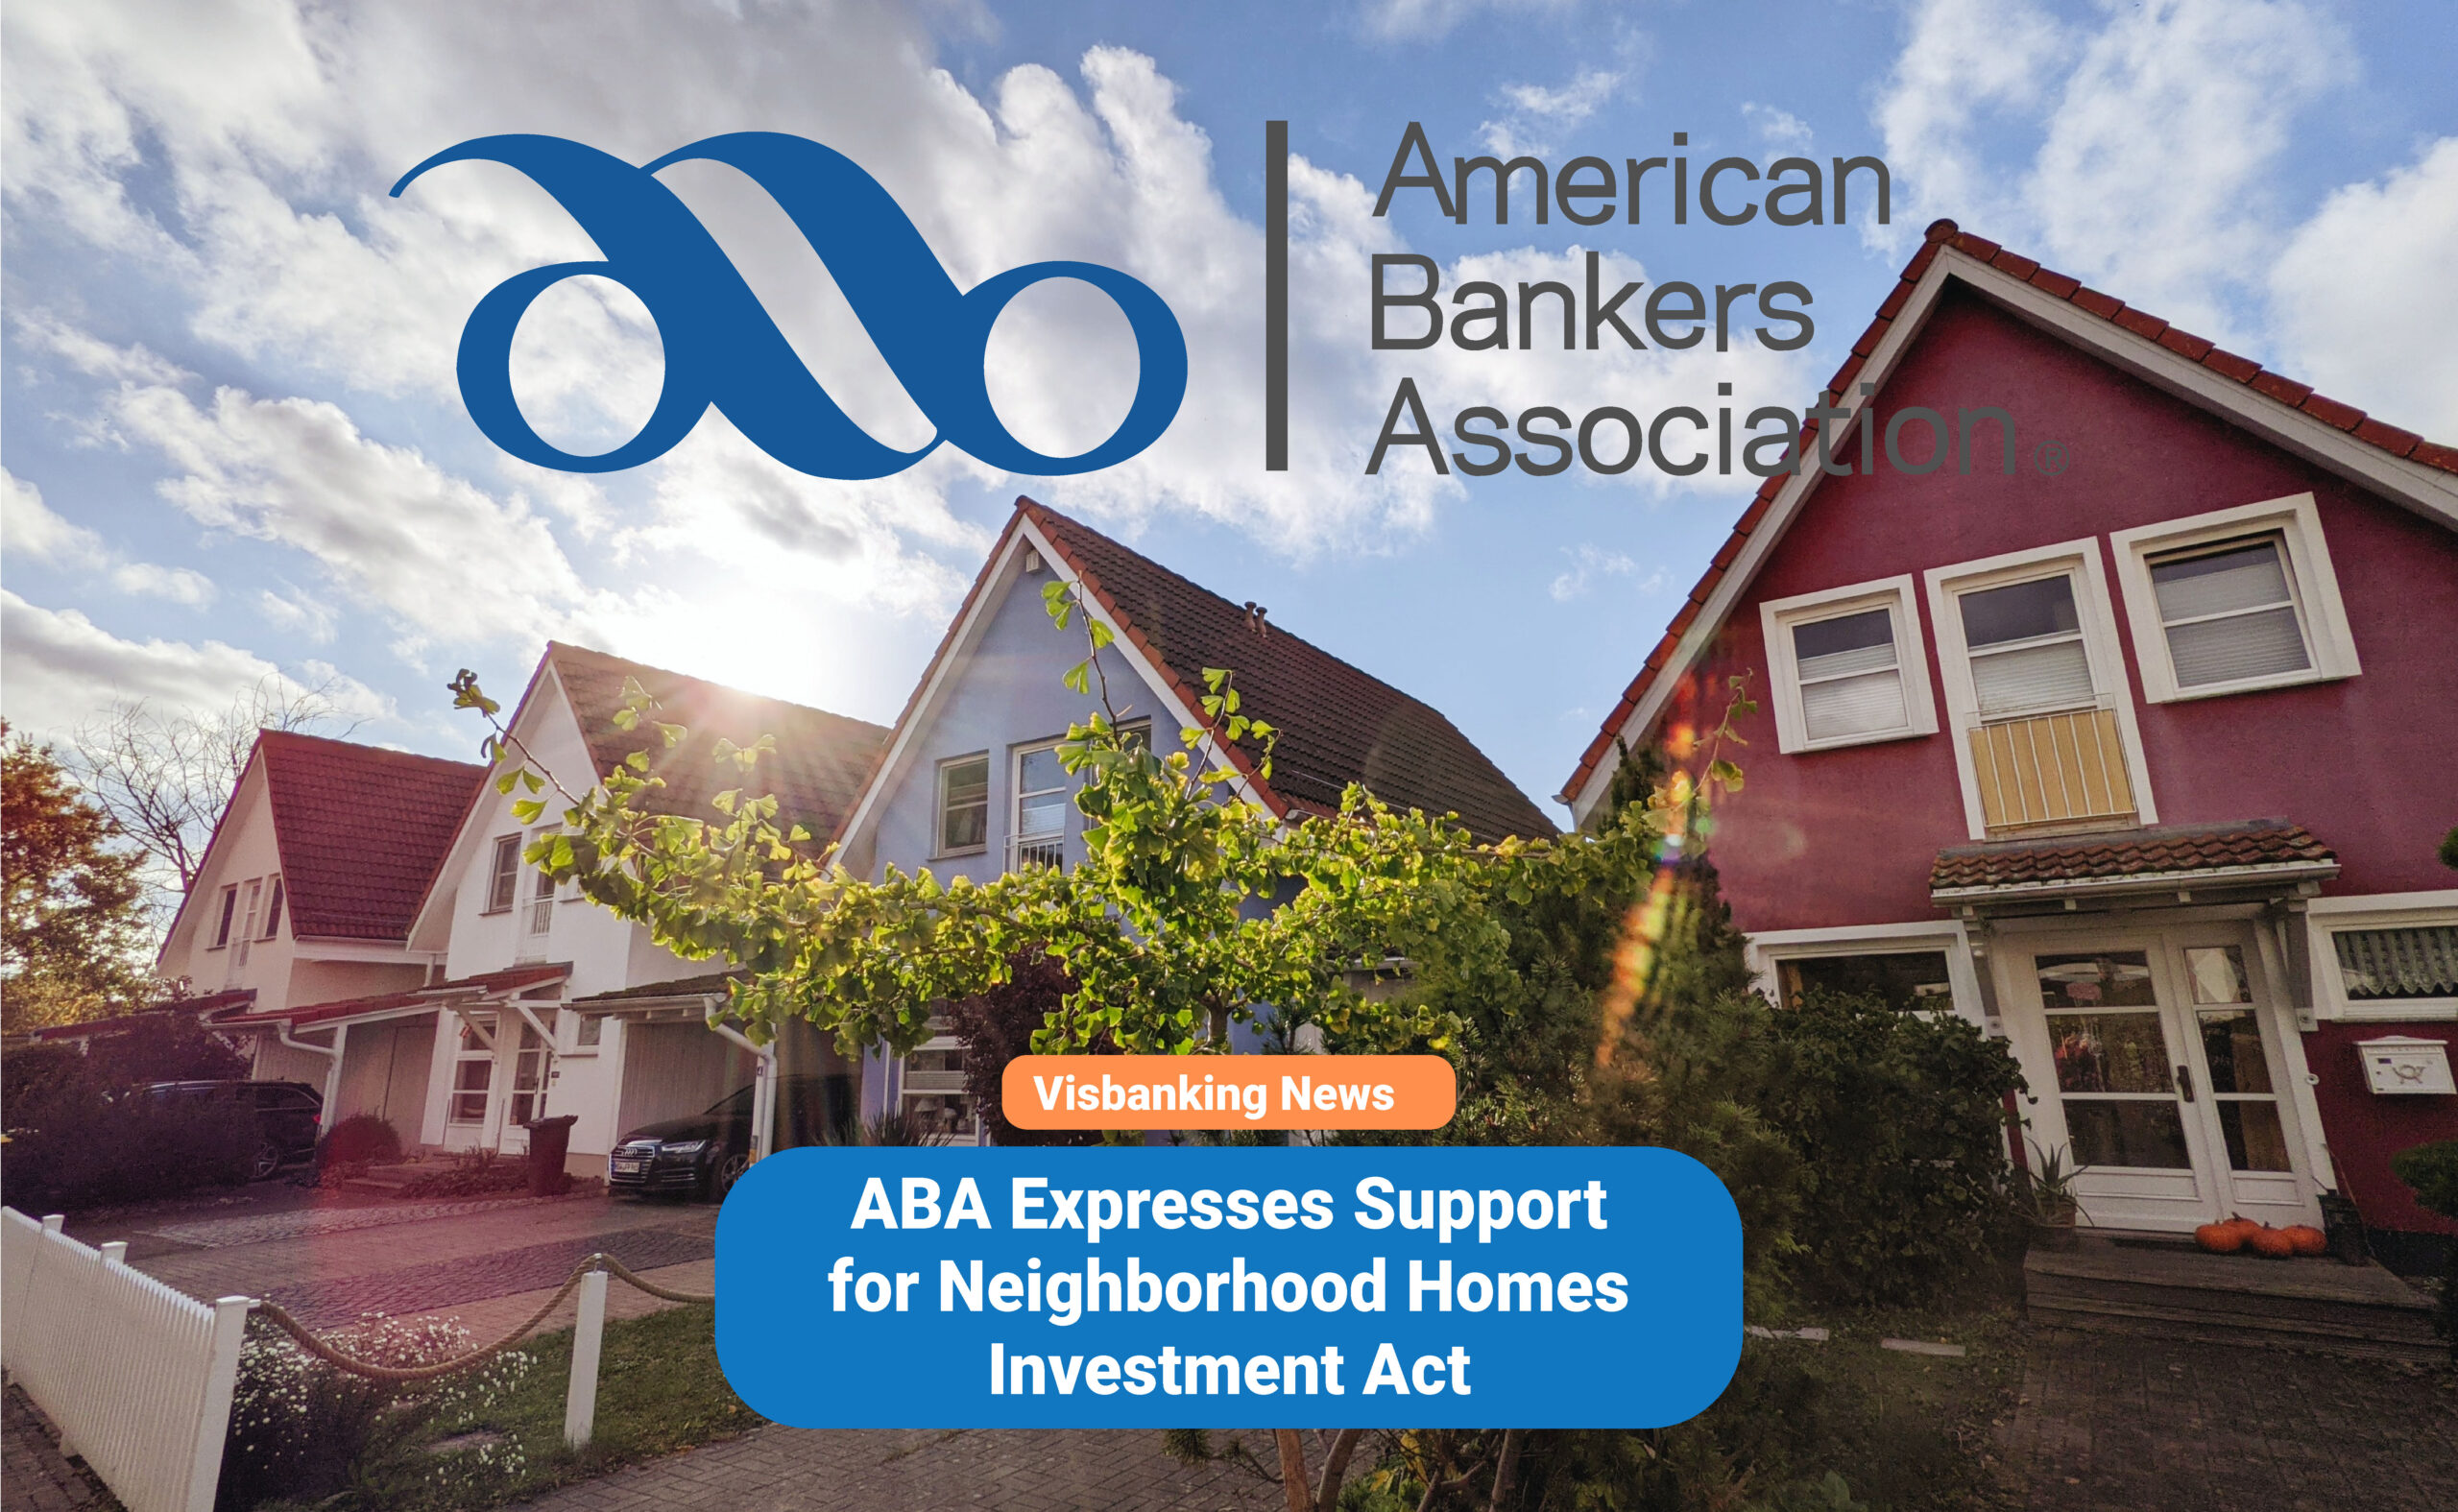 ABA Expresses Support for Neighborhood Homes Investment Act